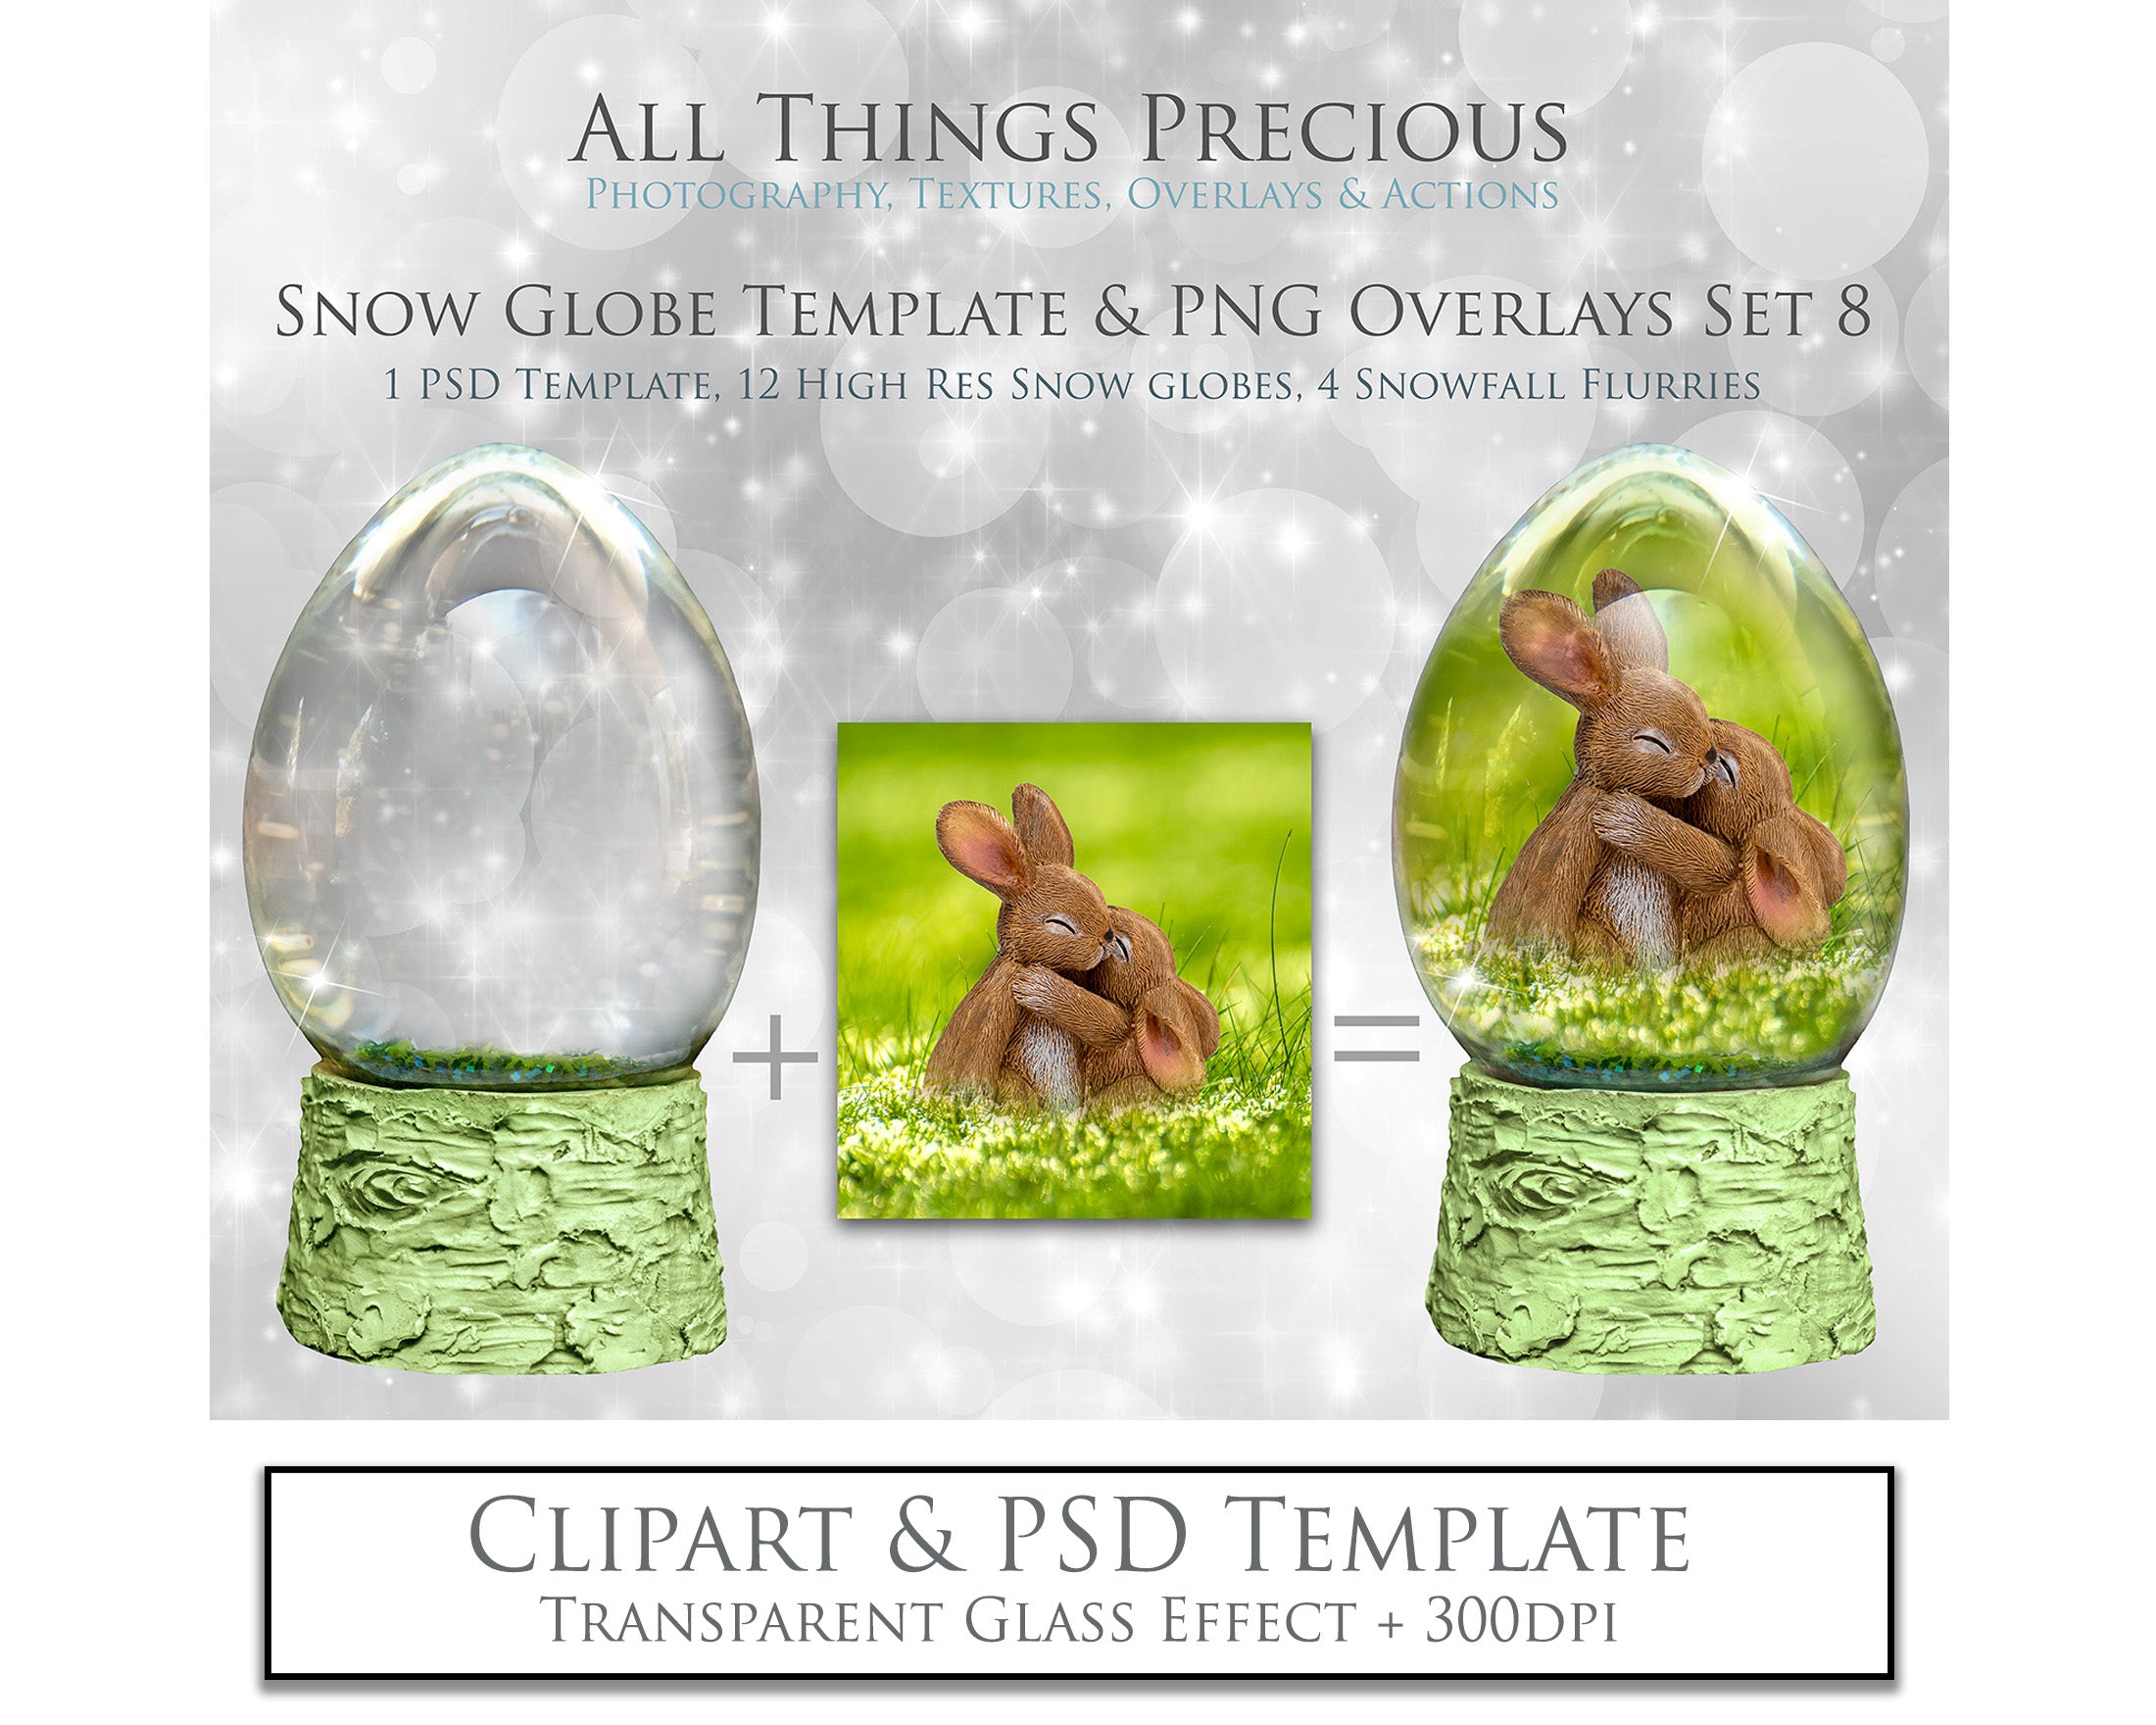 Digital Snow Globe Clipart with snow Overlays and a PSD Template included in the set.The globe is transparent, perfect to add your own images and retain the snow globe effect. Photoshop Photography Background. Printable, Editable for Christmas with Frozen Winter Theme. Glass graphic effects. ATP Textures EASTER EGG SHAPE